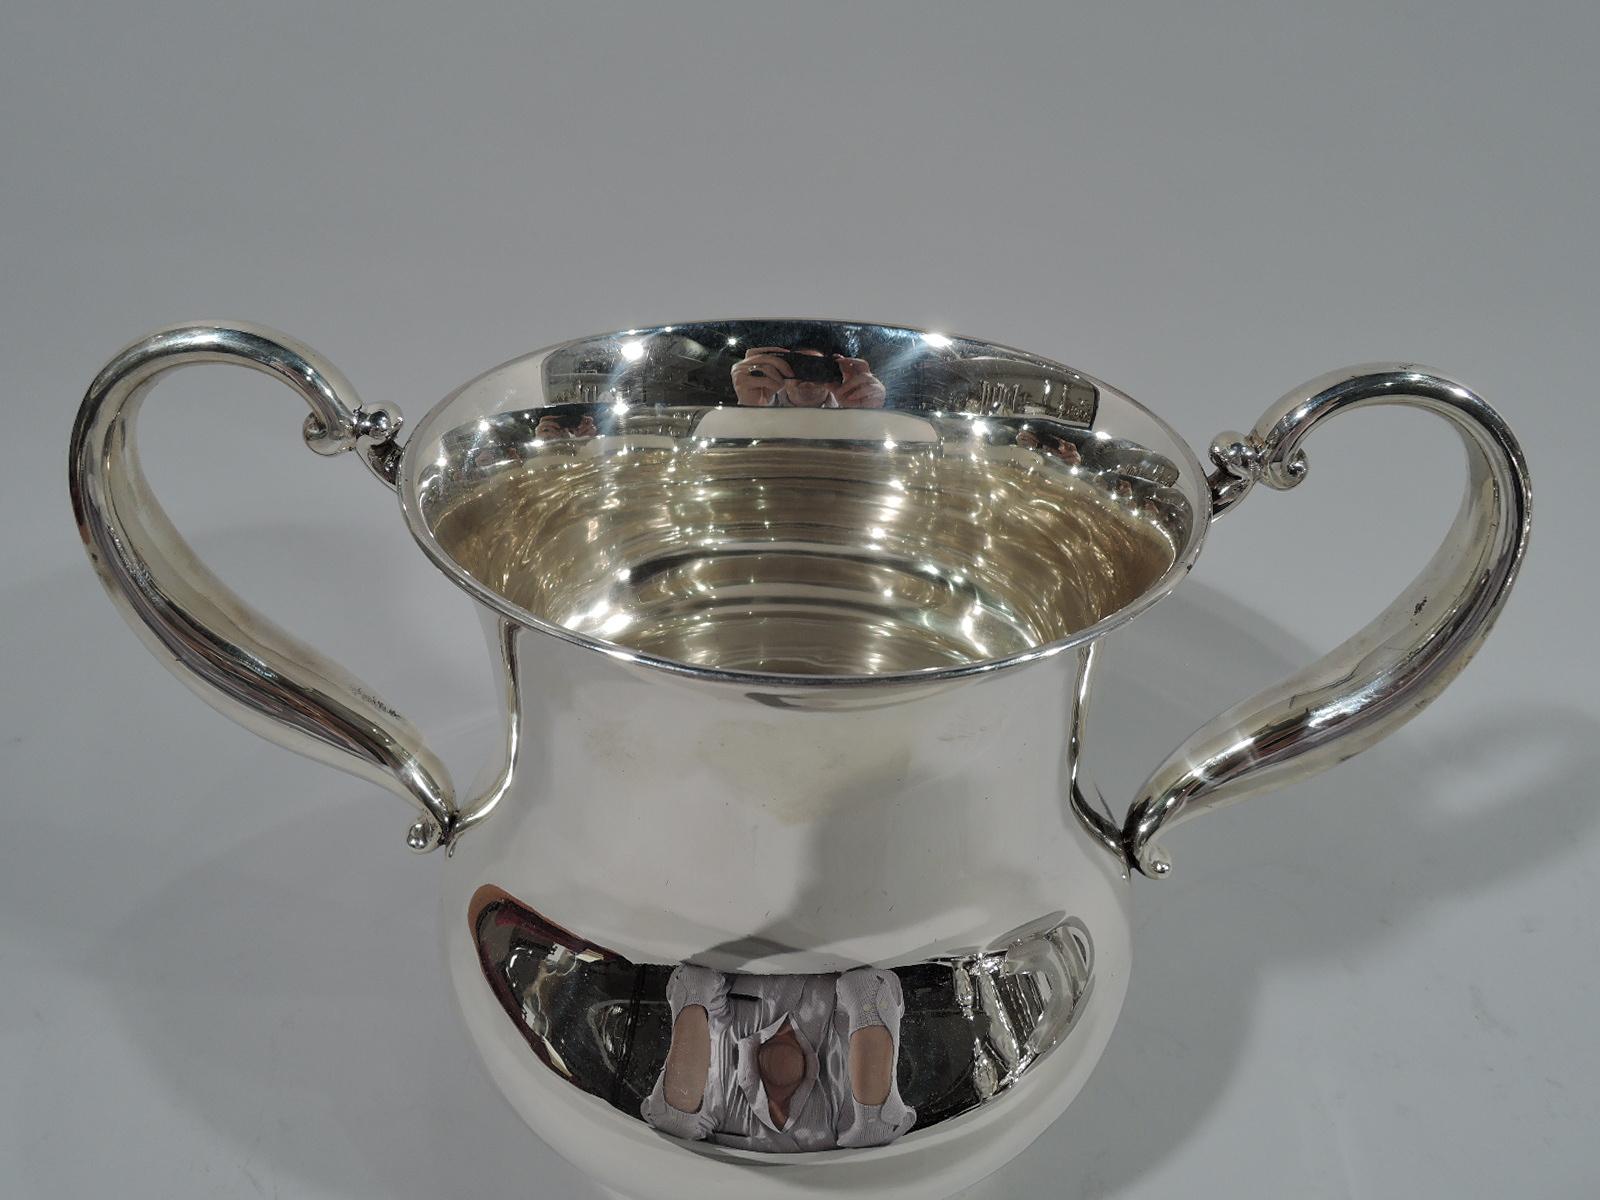 Victorian sterling silver trophy cup. Made by Gorham in Providence in 1898. Bellied baluster with tapering s-scroll side handles and stepped foot. Lots of room for engraving. Hallmark includes date symbol, no. A33M, and volume (3 1/2 pts). Weight: